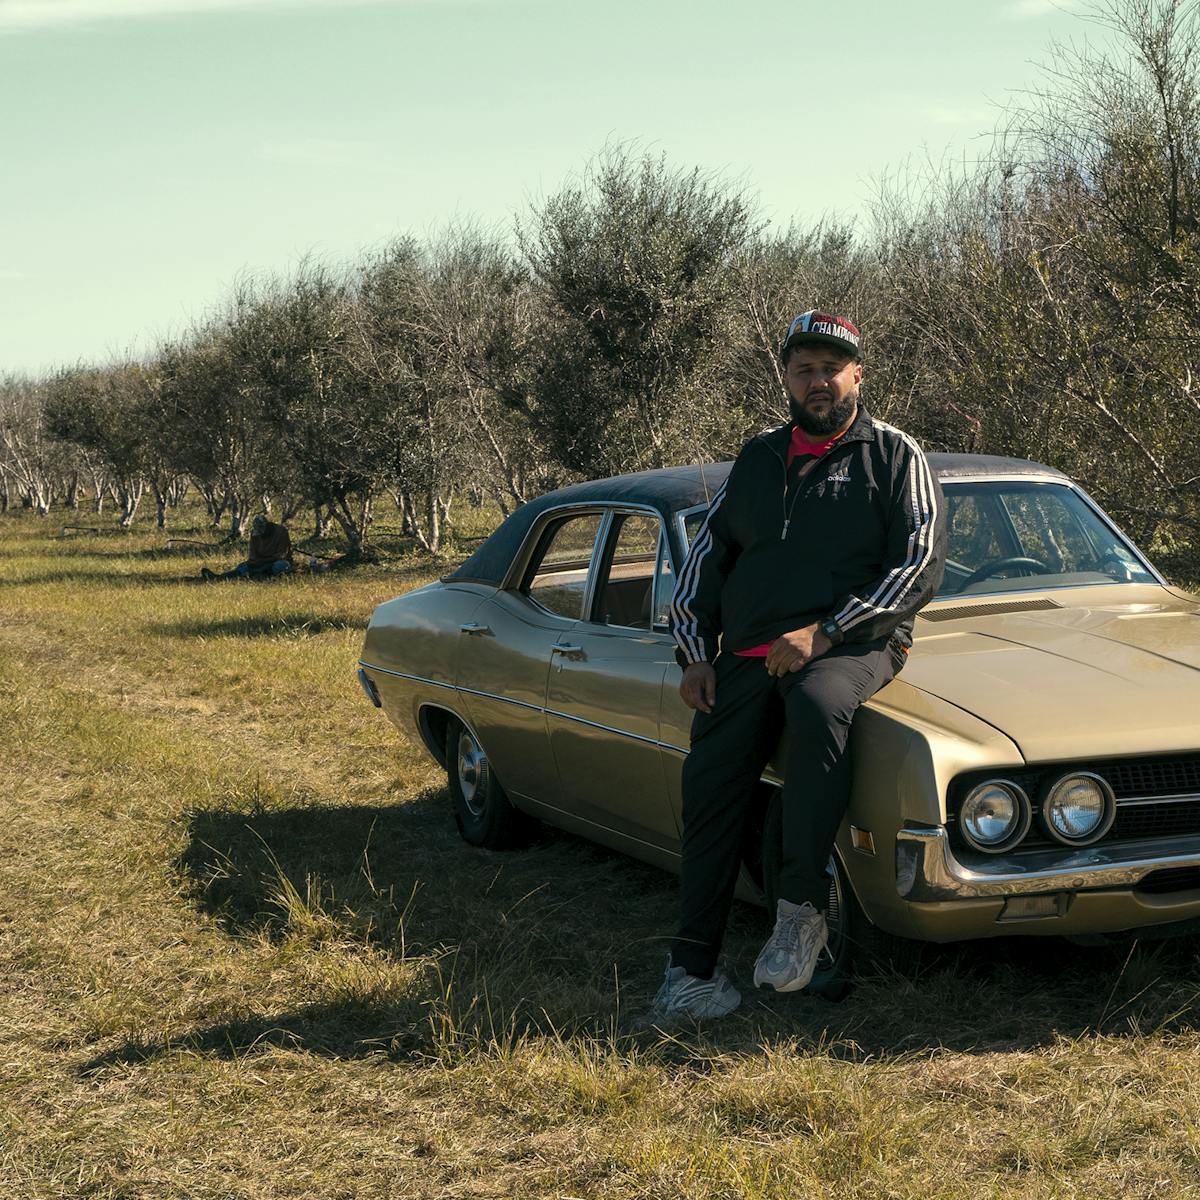 Mo Amer sits against his brown classic car on the olive farm. The sky is light blue streaked with clouds. Amer wears a black Adidas tracksuit and a hat.